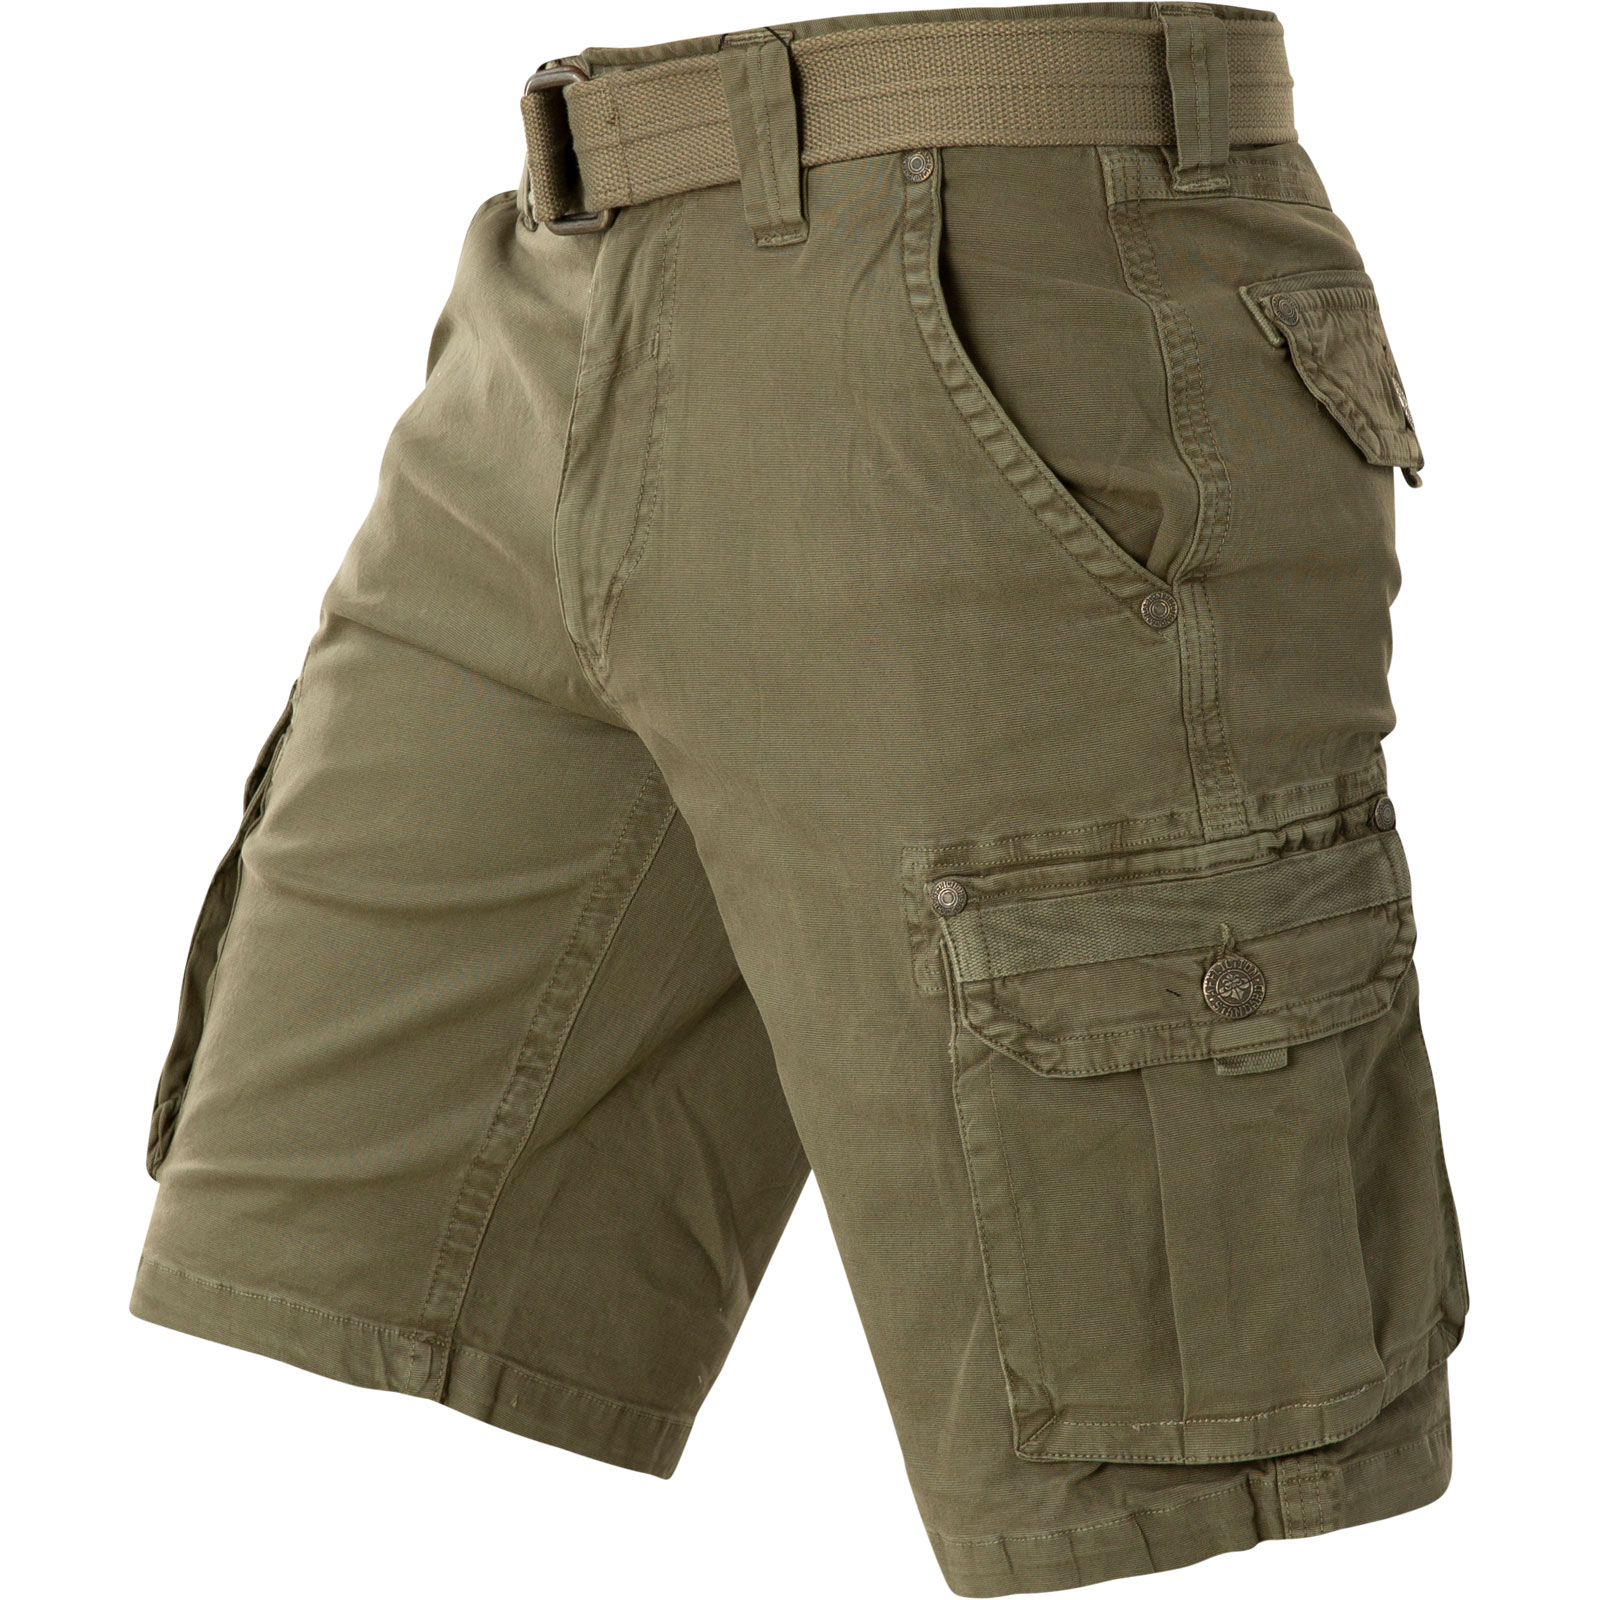 Affliction Departed Cargo Shorts with many pockets